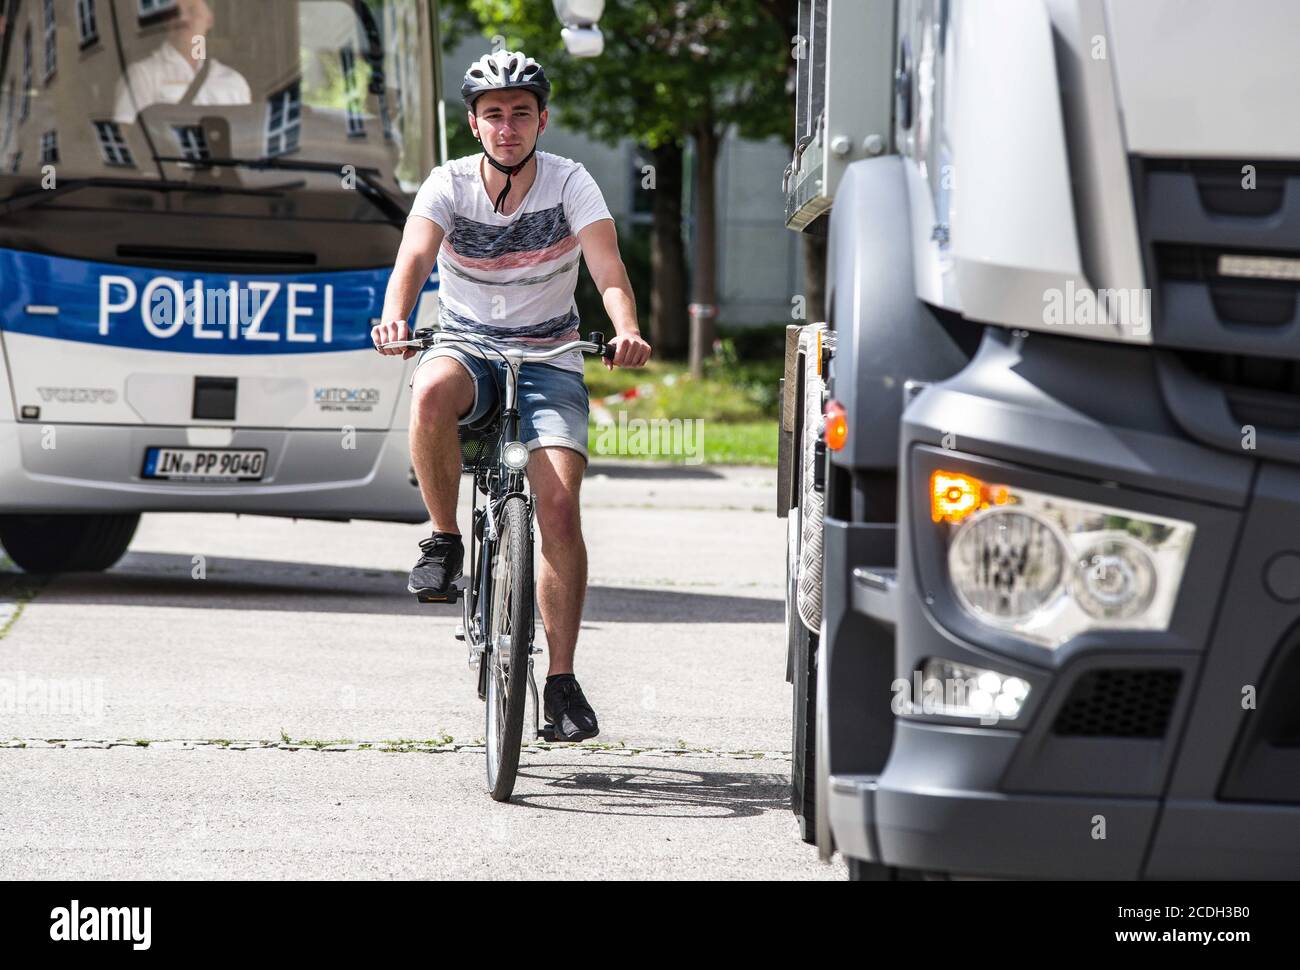 Munich, Bavaria, Germany. 28th Aug, 2020. A member of the Munich Bereitschaftspolizei rides a bicycle to trigger the turning assistant systems. Bavarian Interior Minister Joachim Herrmann alongside the Bavarian Police revealed service vehicles outfitted with the new turning assistant (Abbiegassistent) devices. In 2018 alone 455 bicyclists were killed, with trucks turning blind as one preventable cause. The turning assistant systems are currently voluntary, but in 2022 will become mandatory for old and new trucks and in 2024 for all vehicles as part of an EU-wide safety program. (Credit Ima Stock Photo